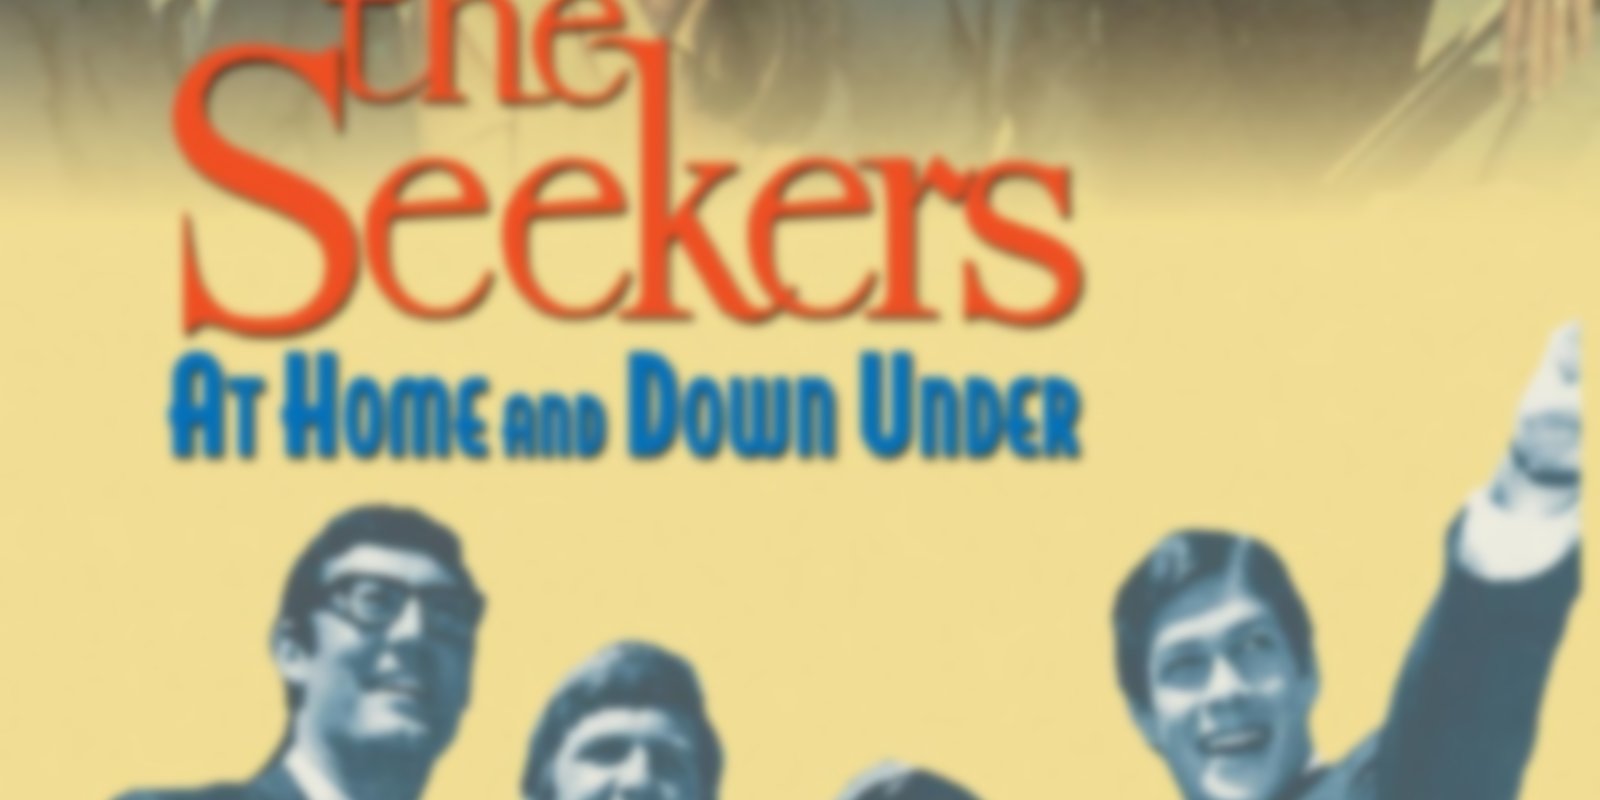 The Seekers - At Home and Down Under